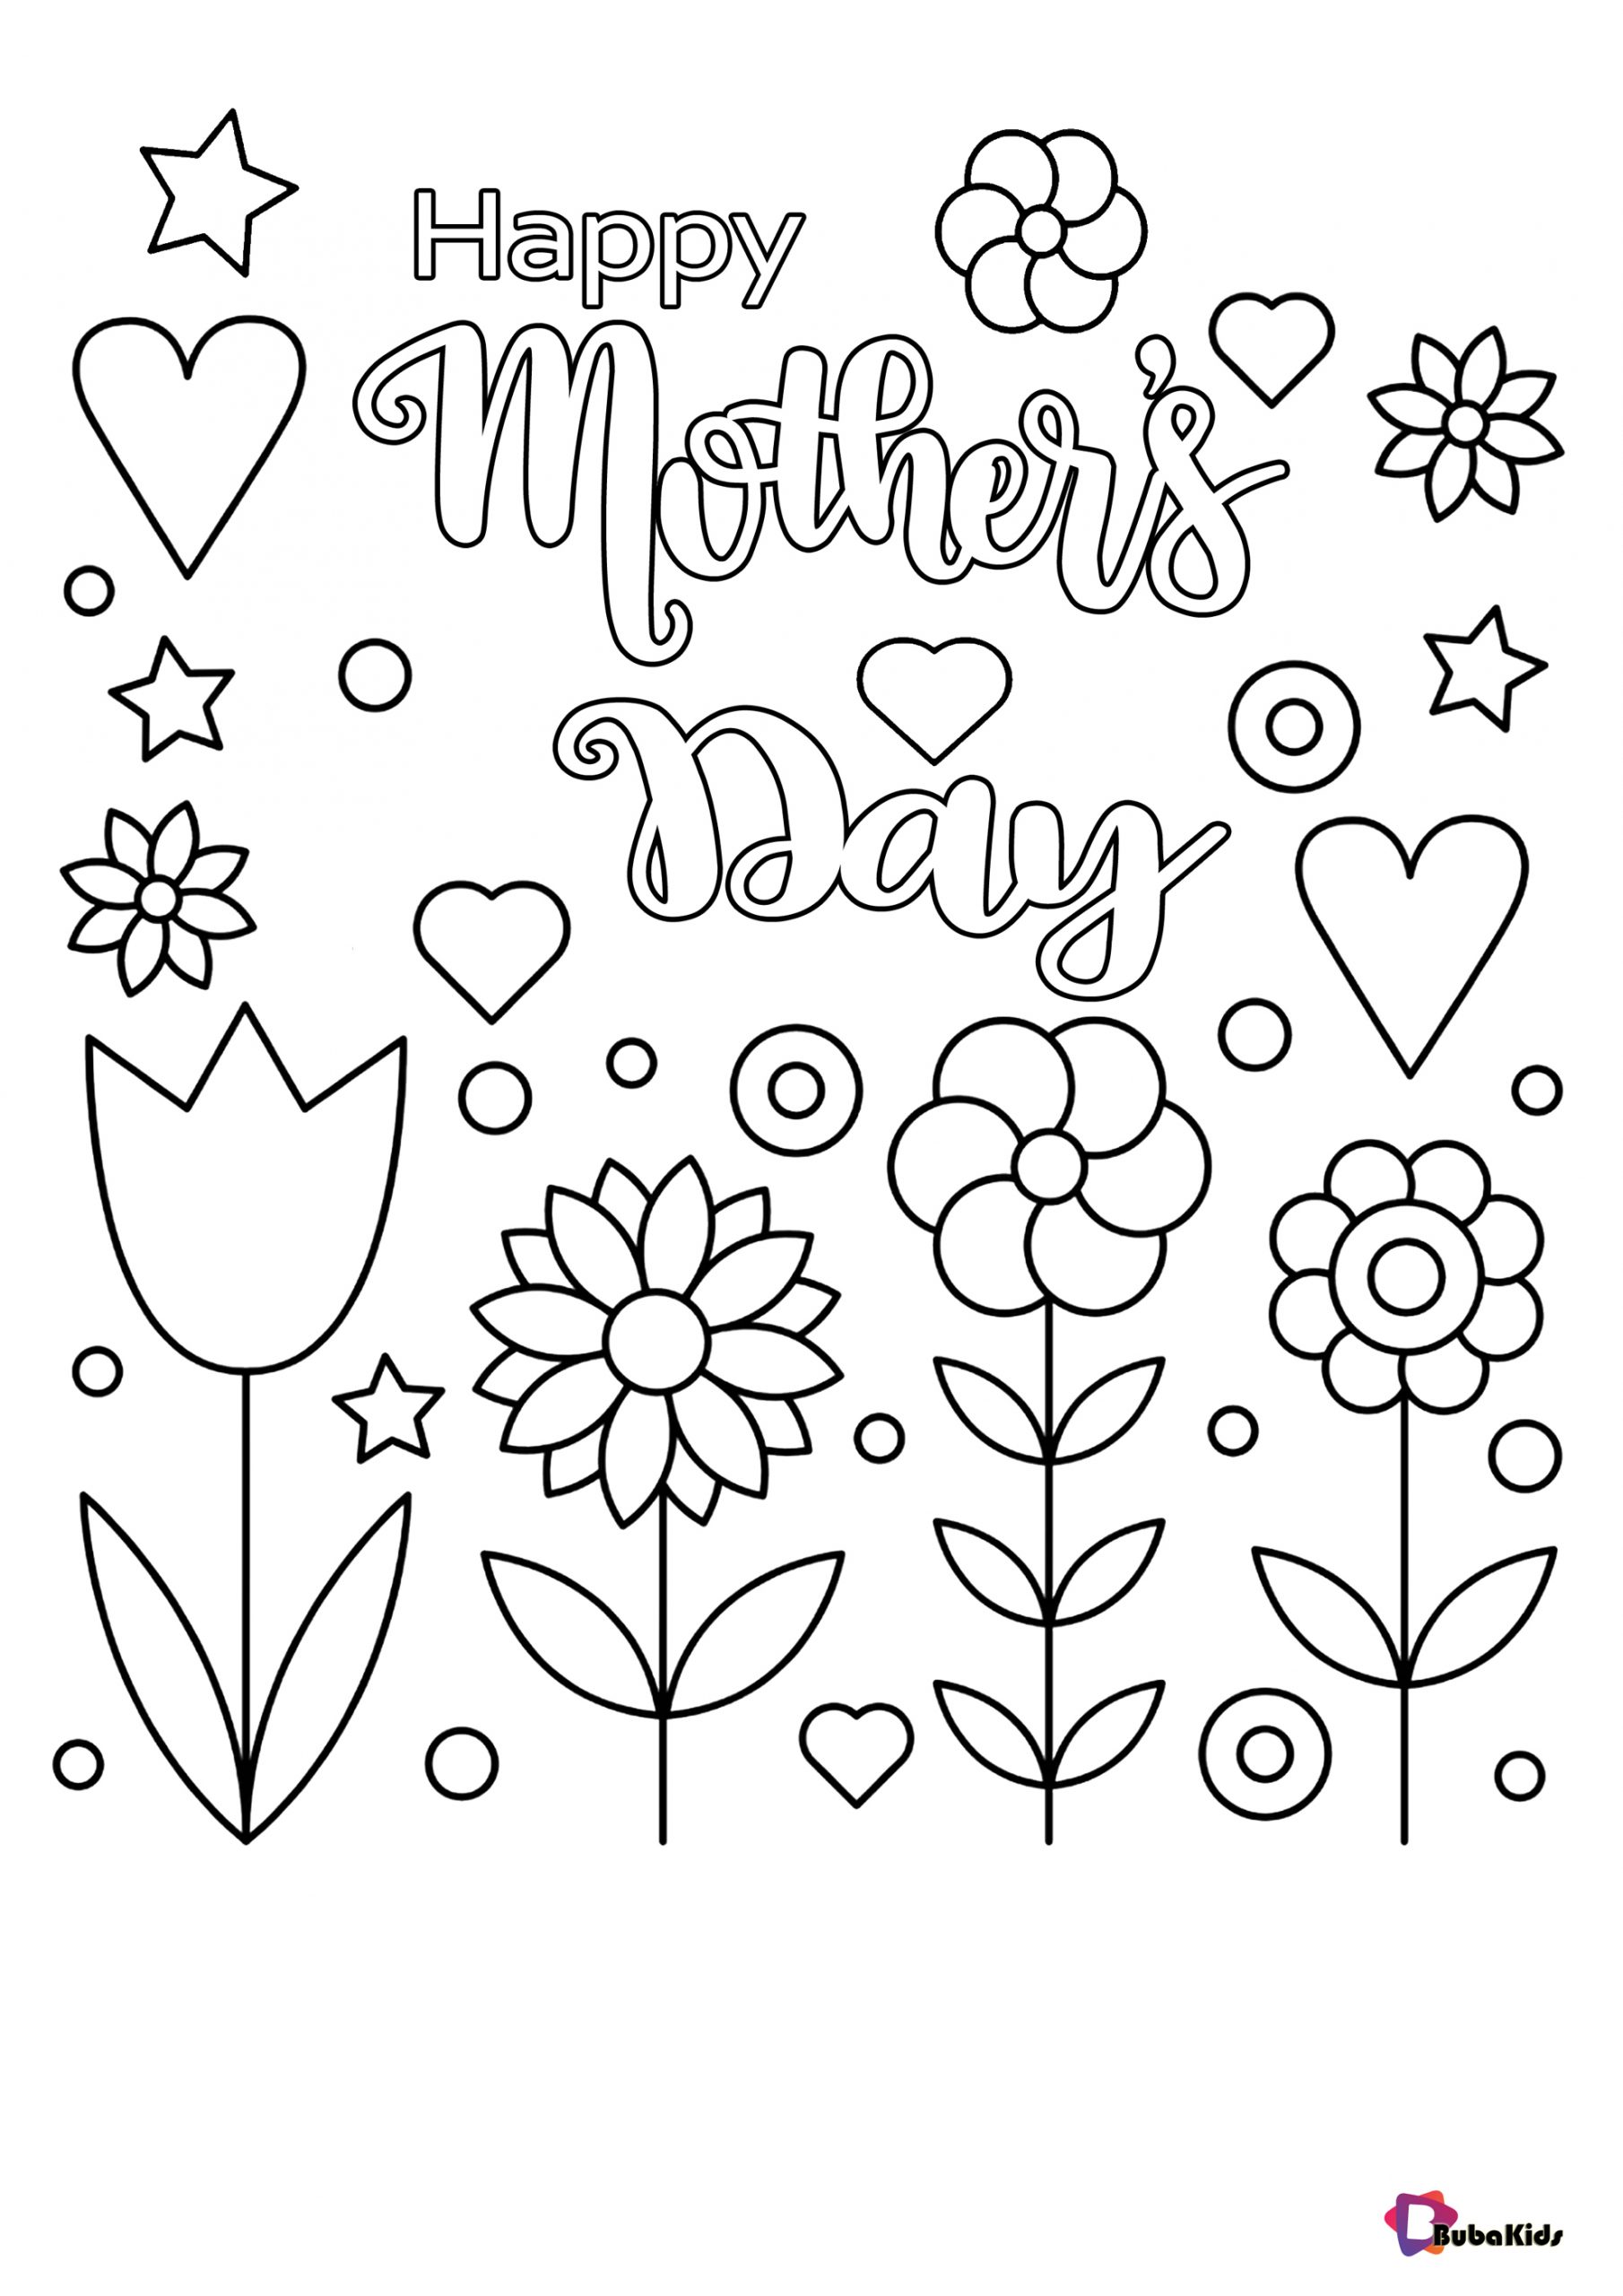 Happy mother’s day coloring pages happy tulips flowers hearts Wallpaper